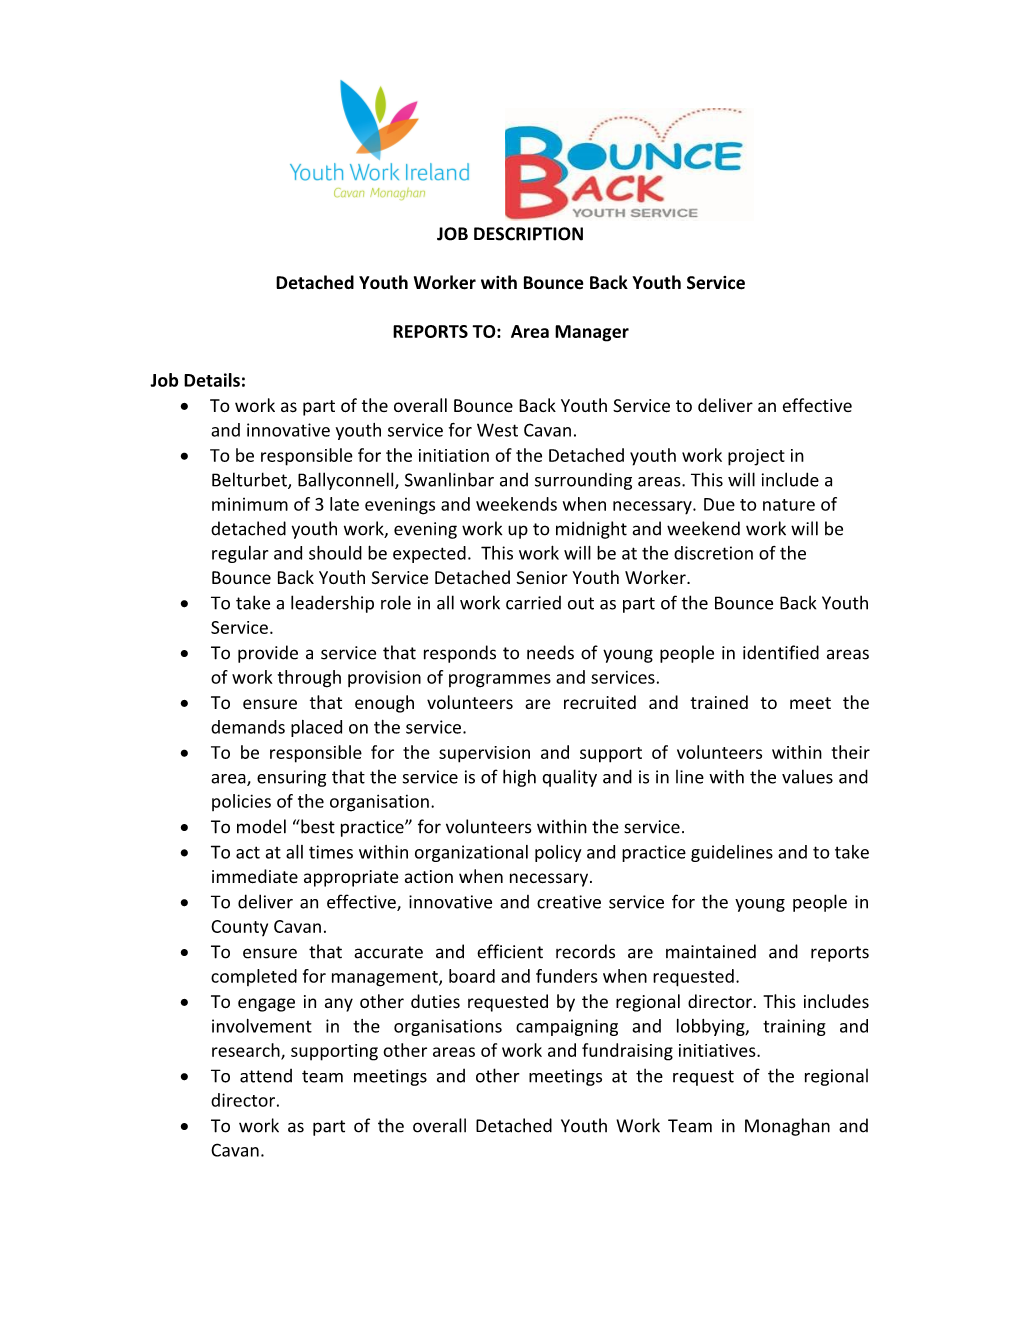 Detached Youth Worker with Bounce Back Youth Service